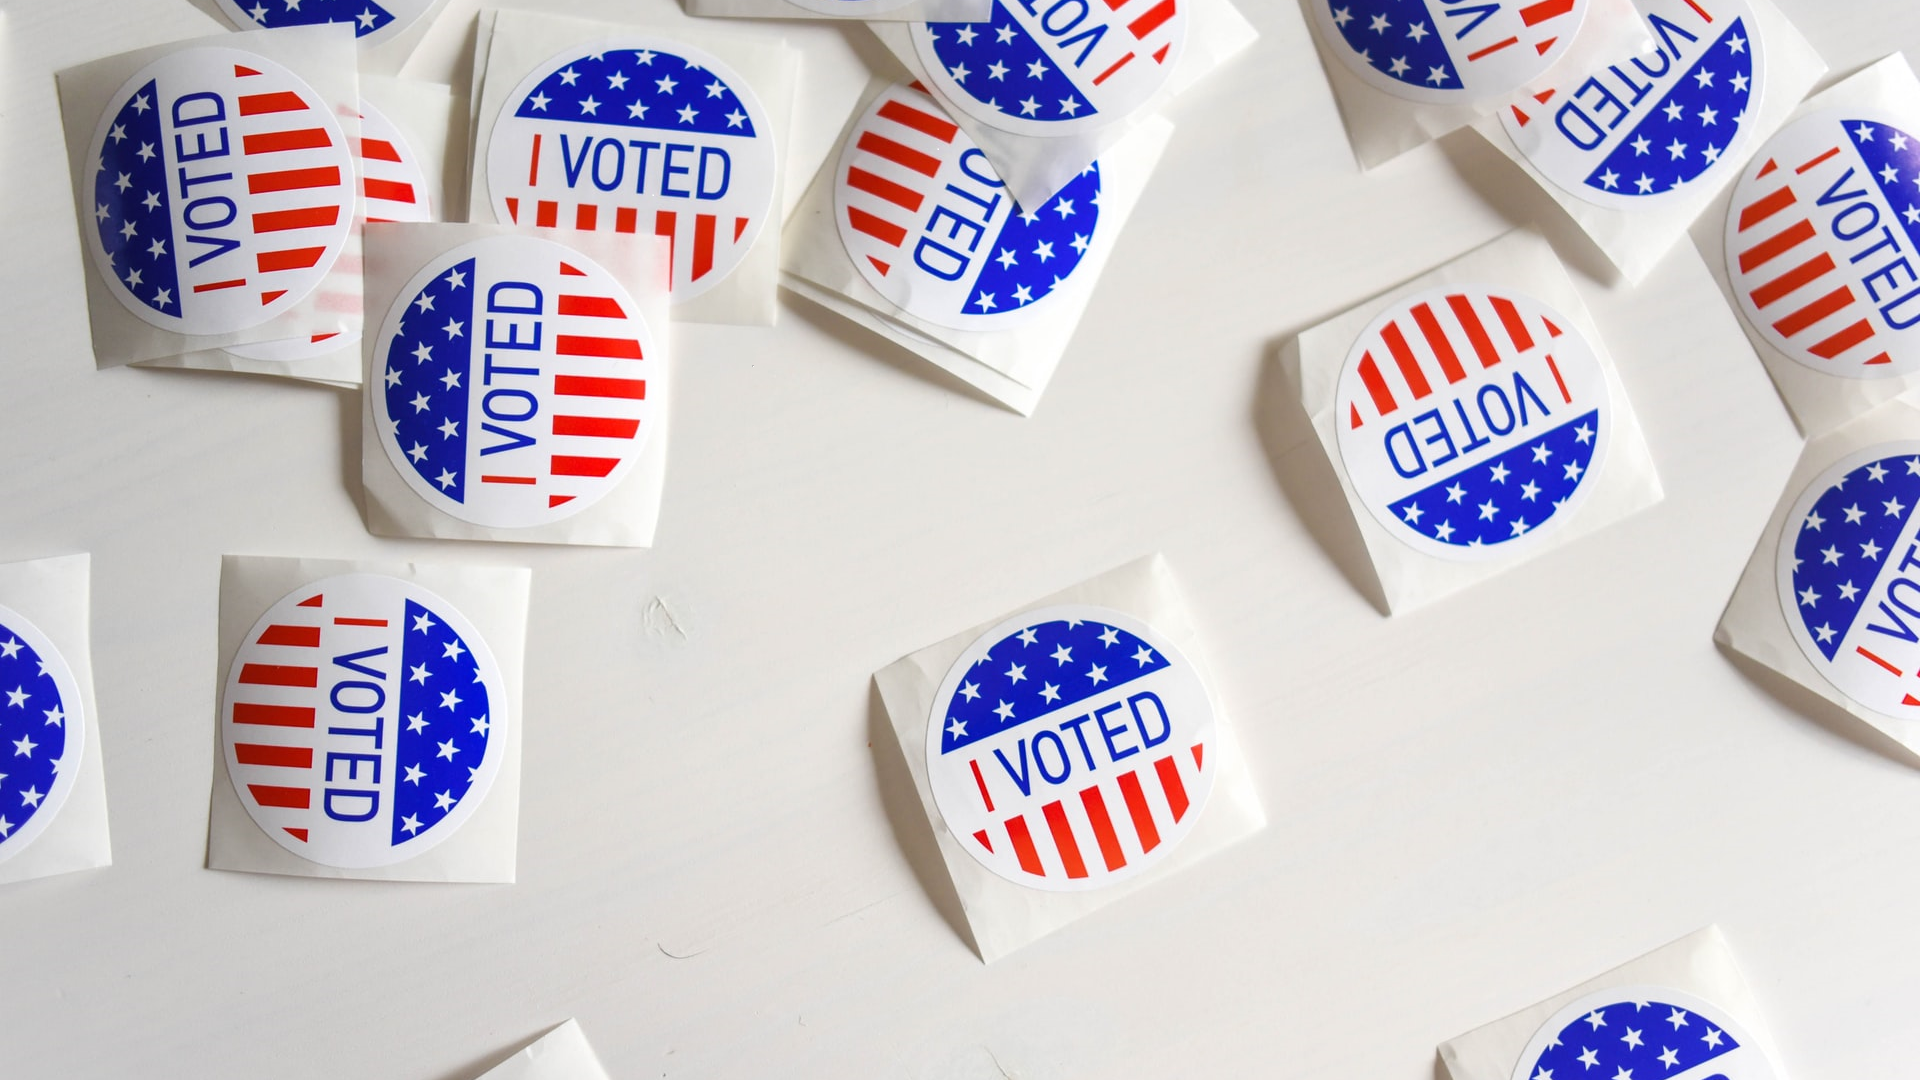 Picture of "I Voted" stickers on a white table